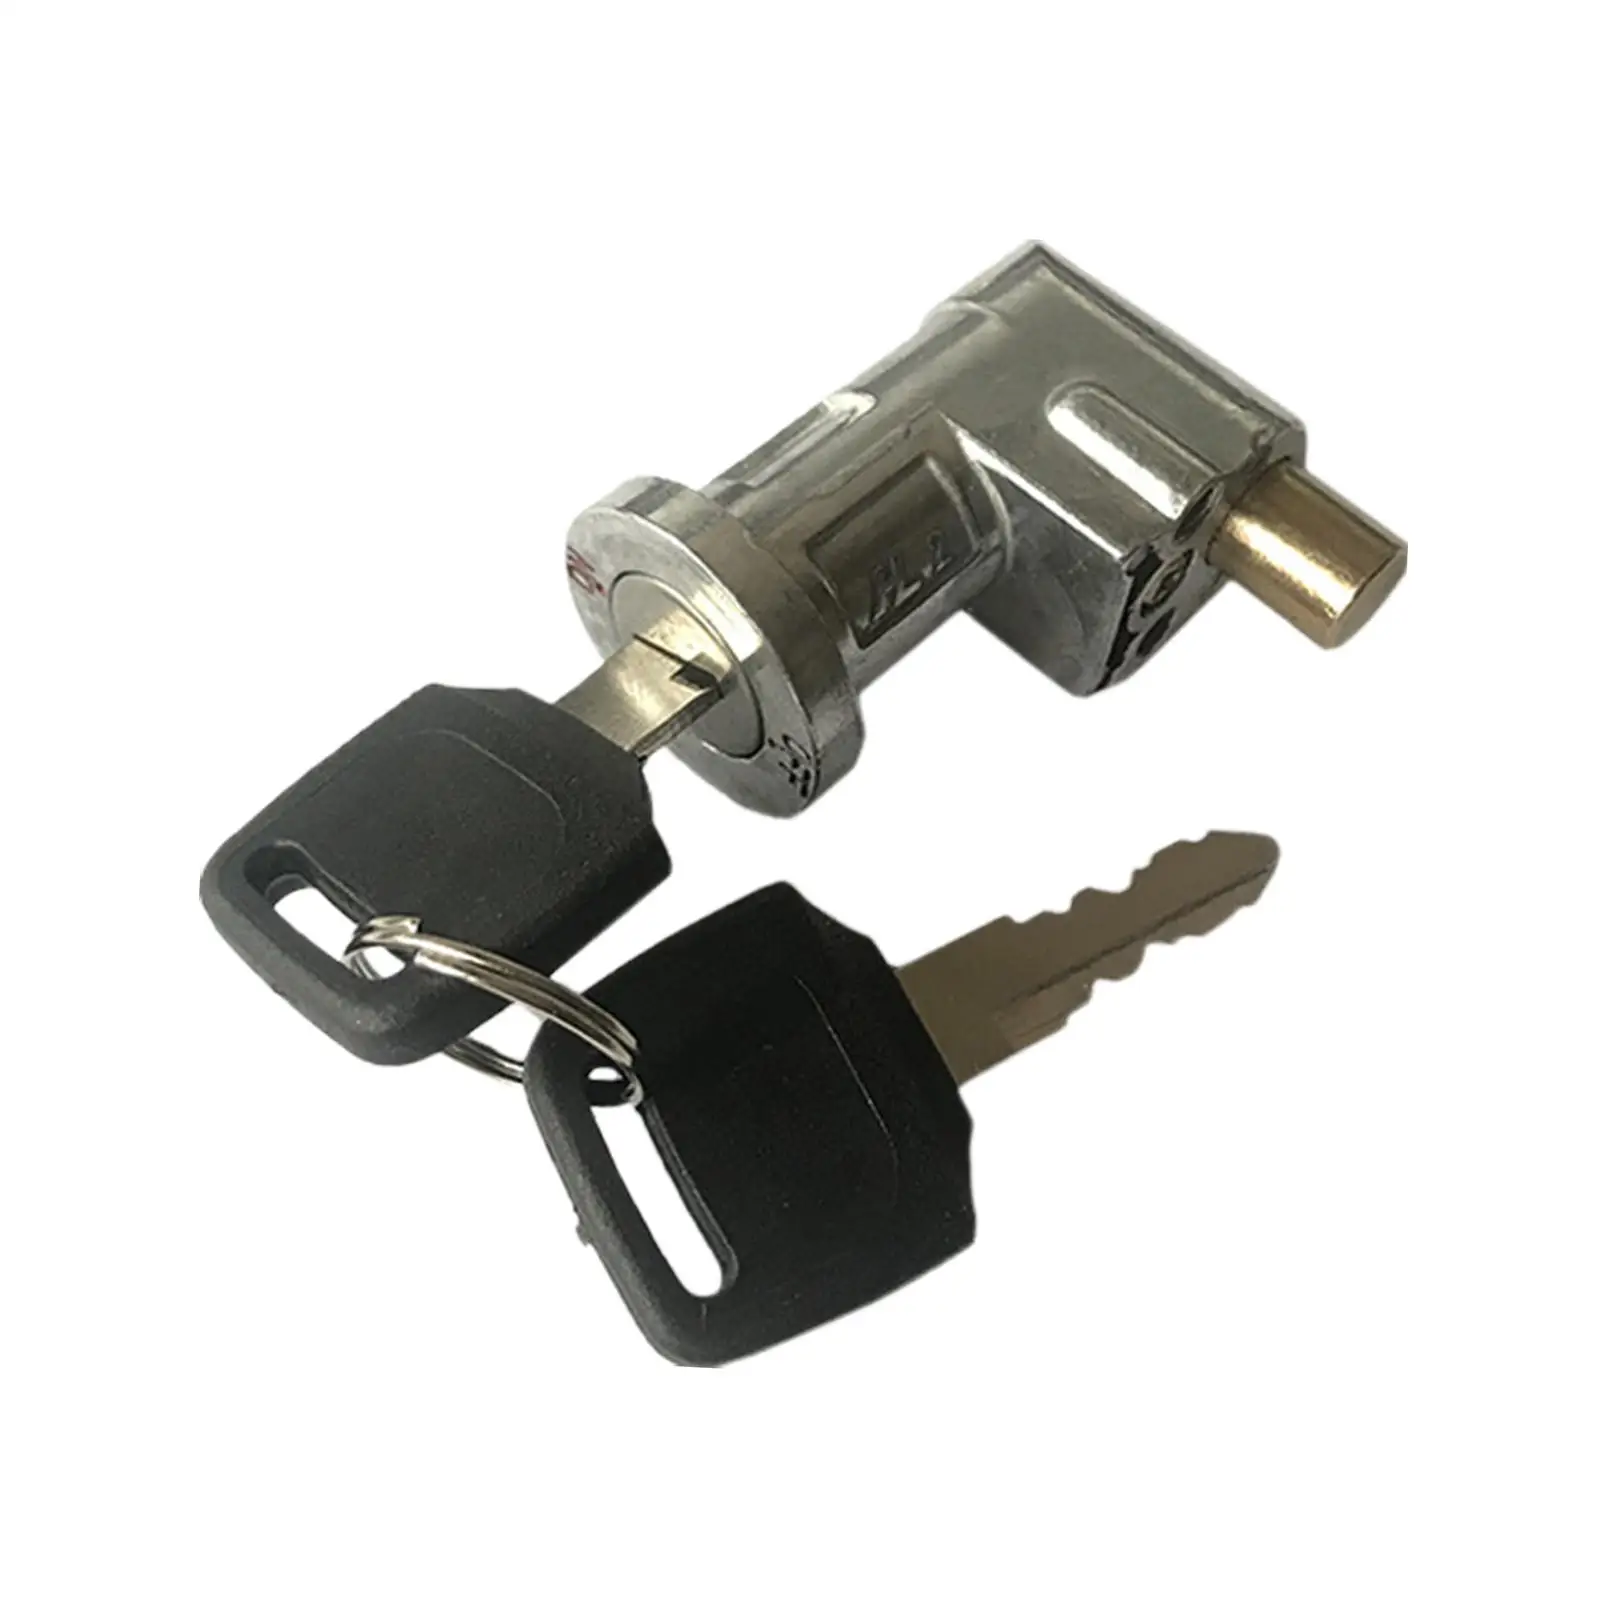 Battery Box Safety Lock Ignition Lock Key Switch on Off Key Switch Cylinder Lock Motorcycle Battery Locks for Electric Bikes